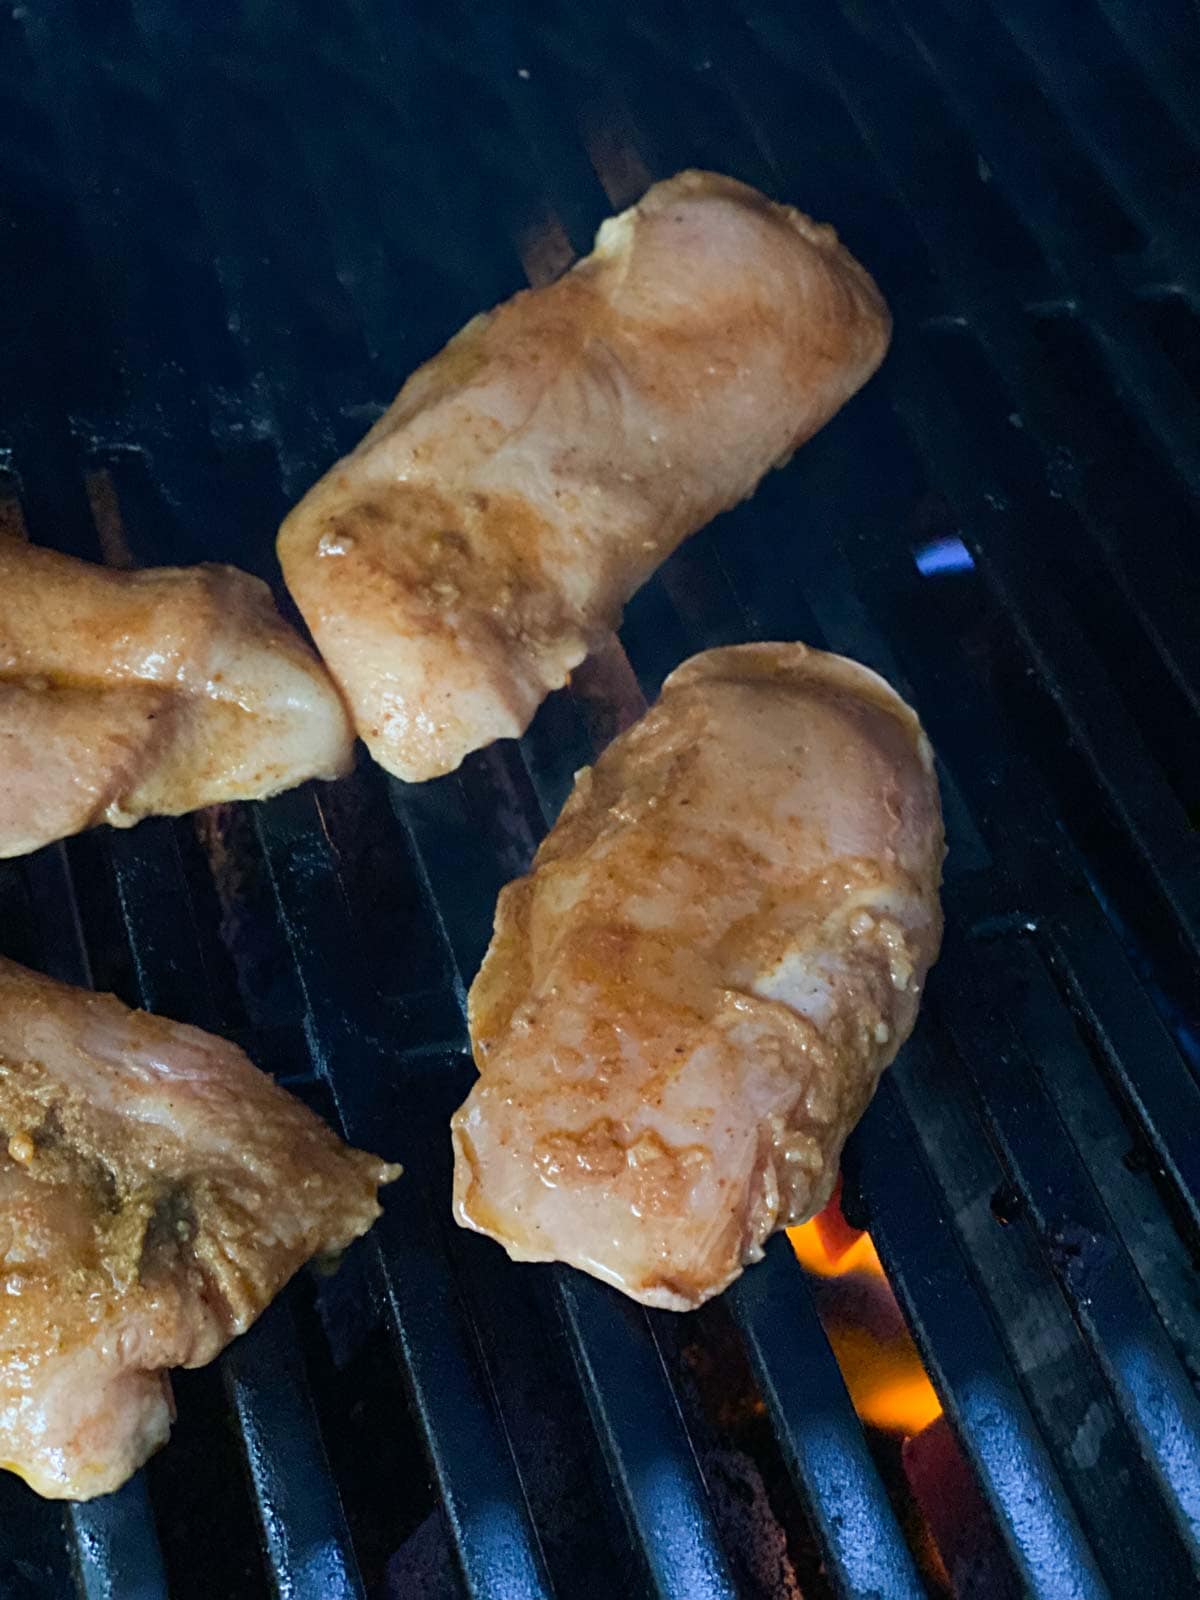 Raw chicken placed on grill.